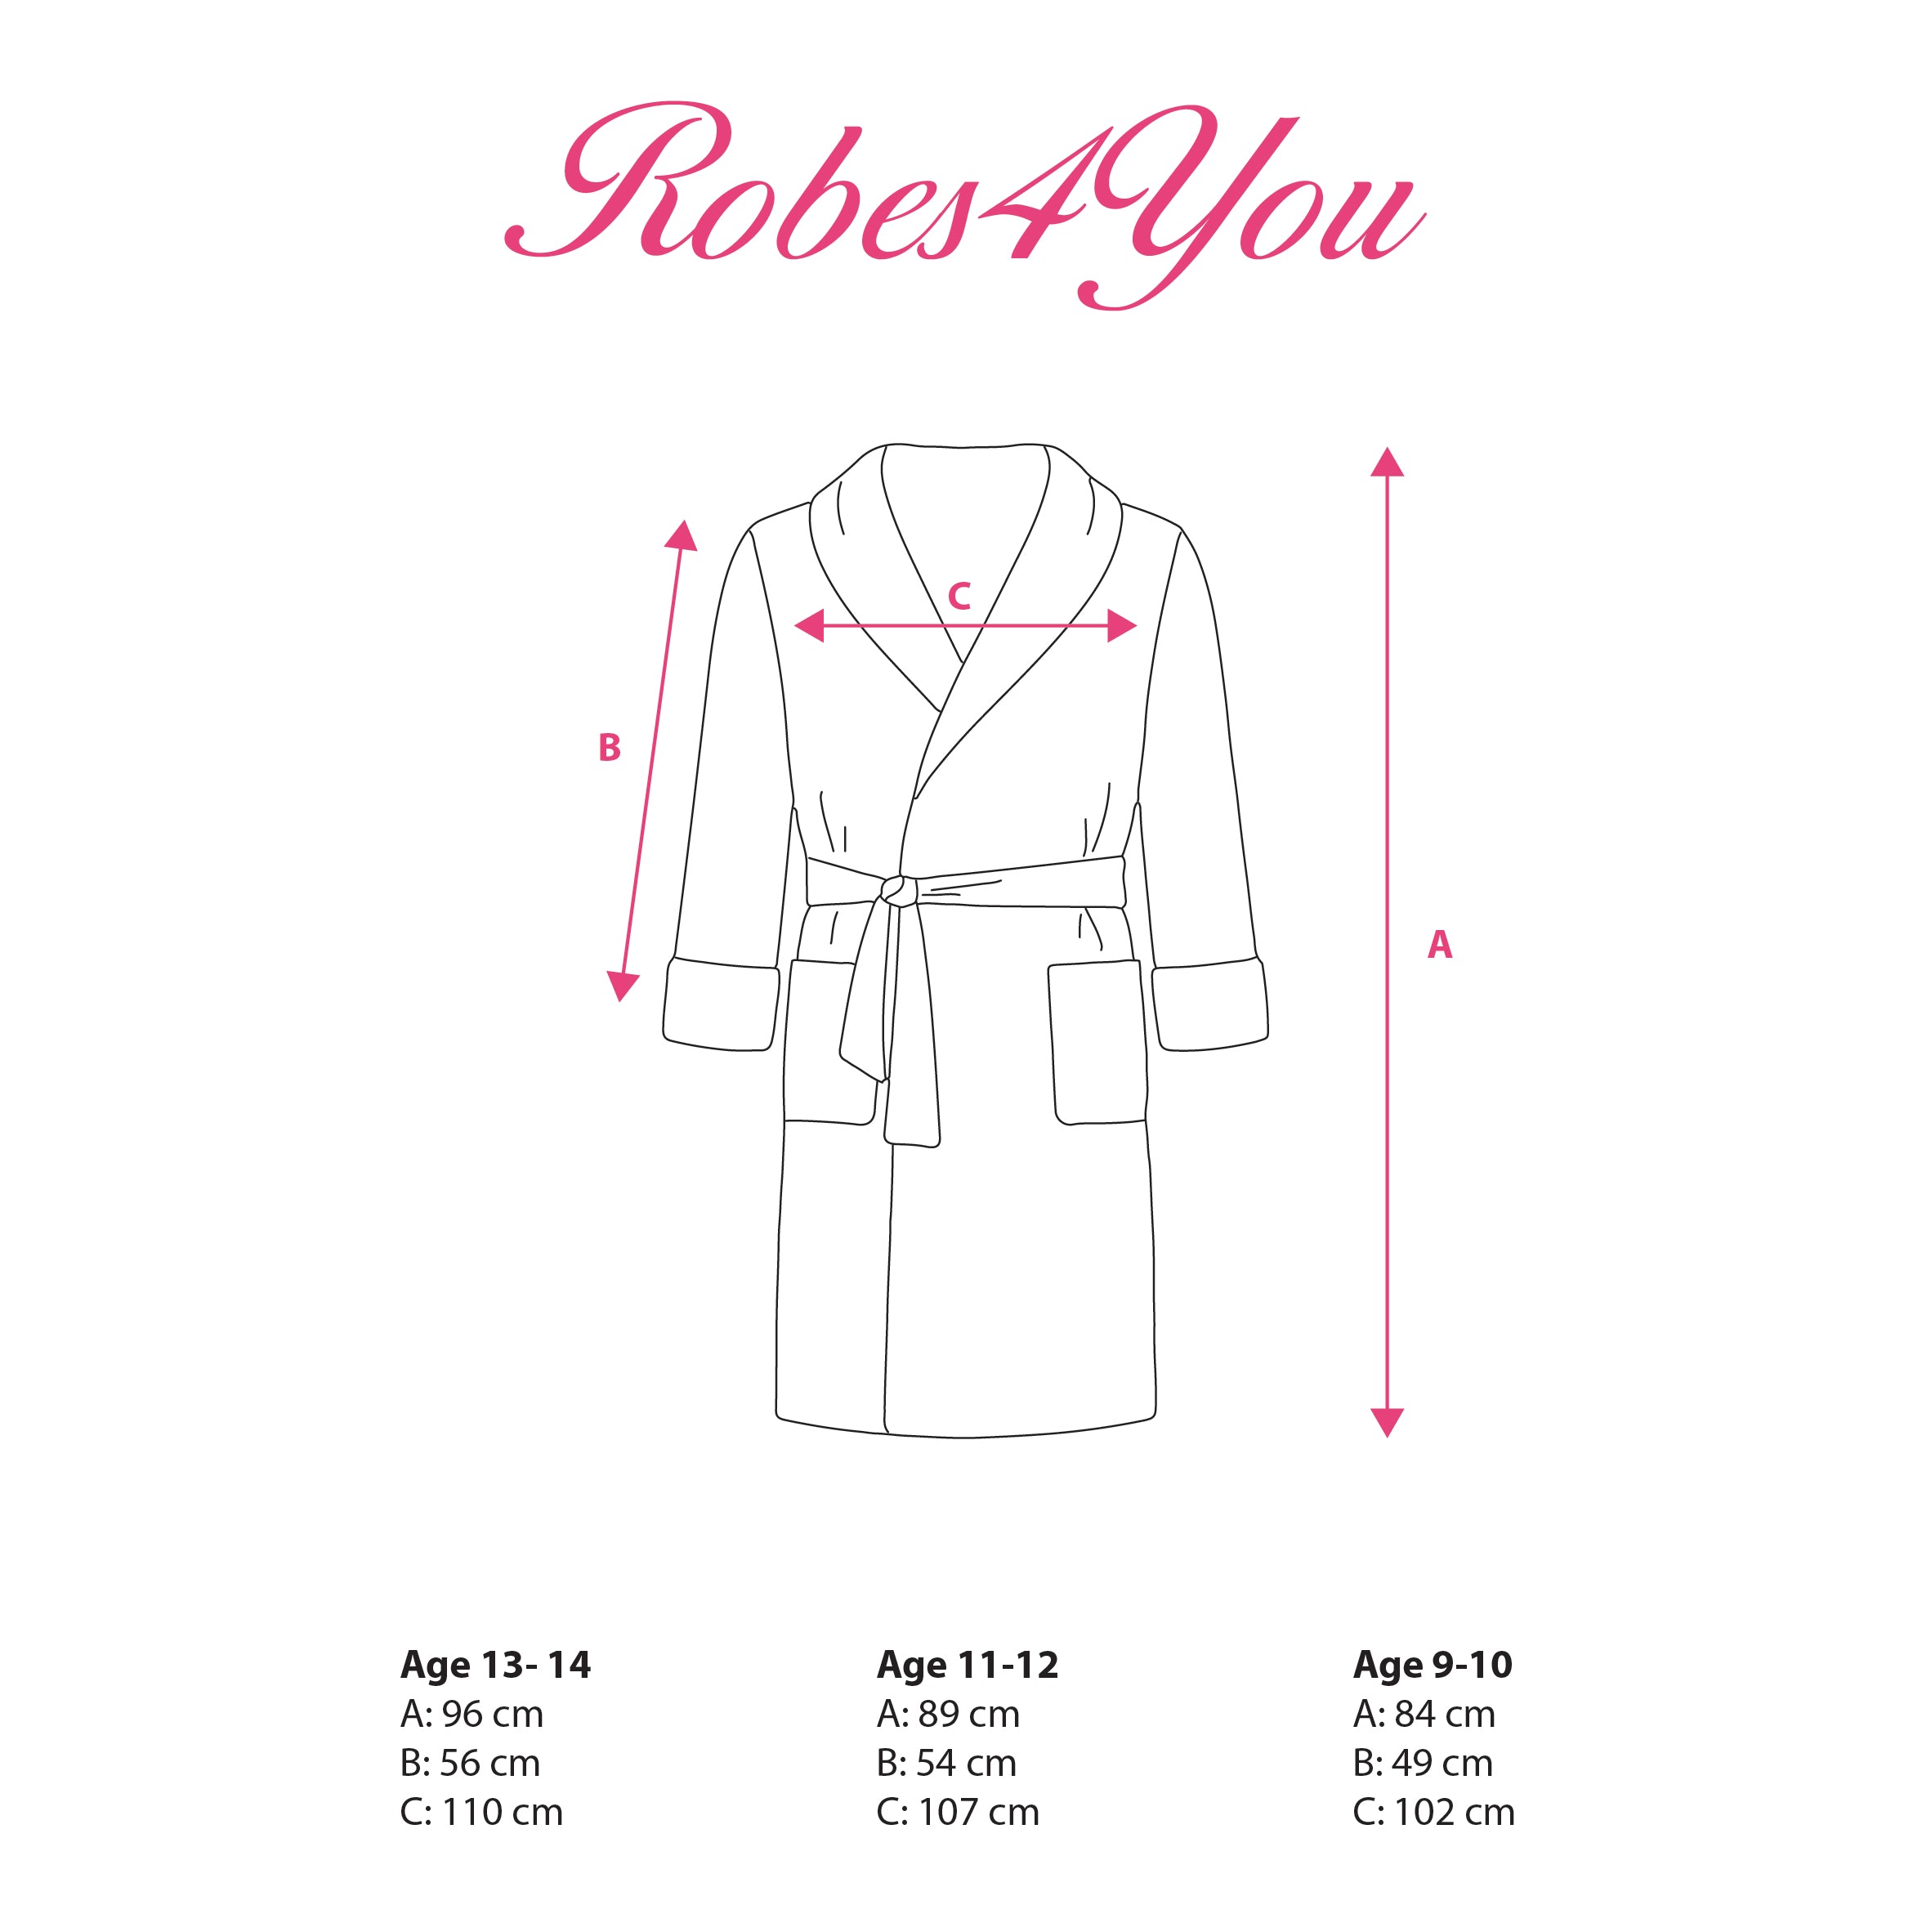 Teenager robes sizing-robes4you 